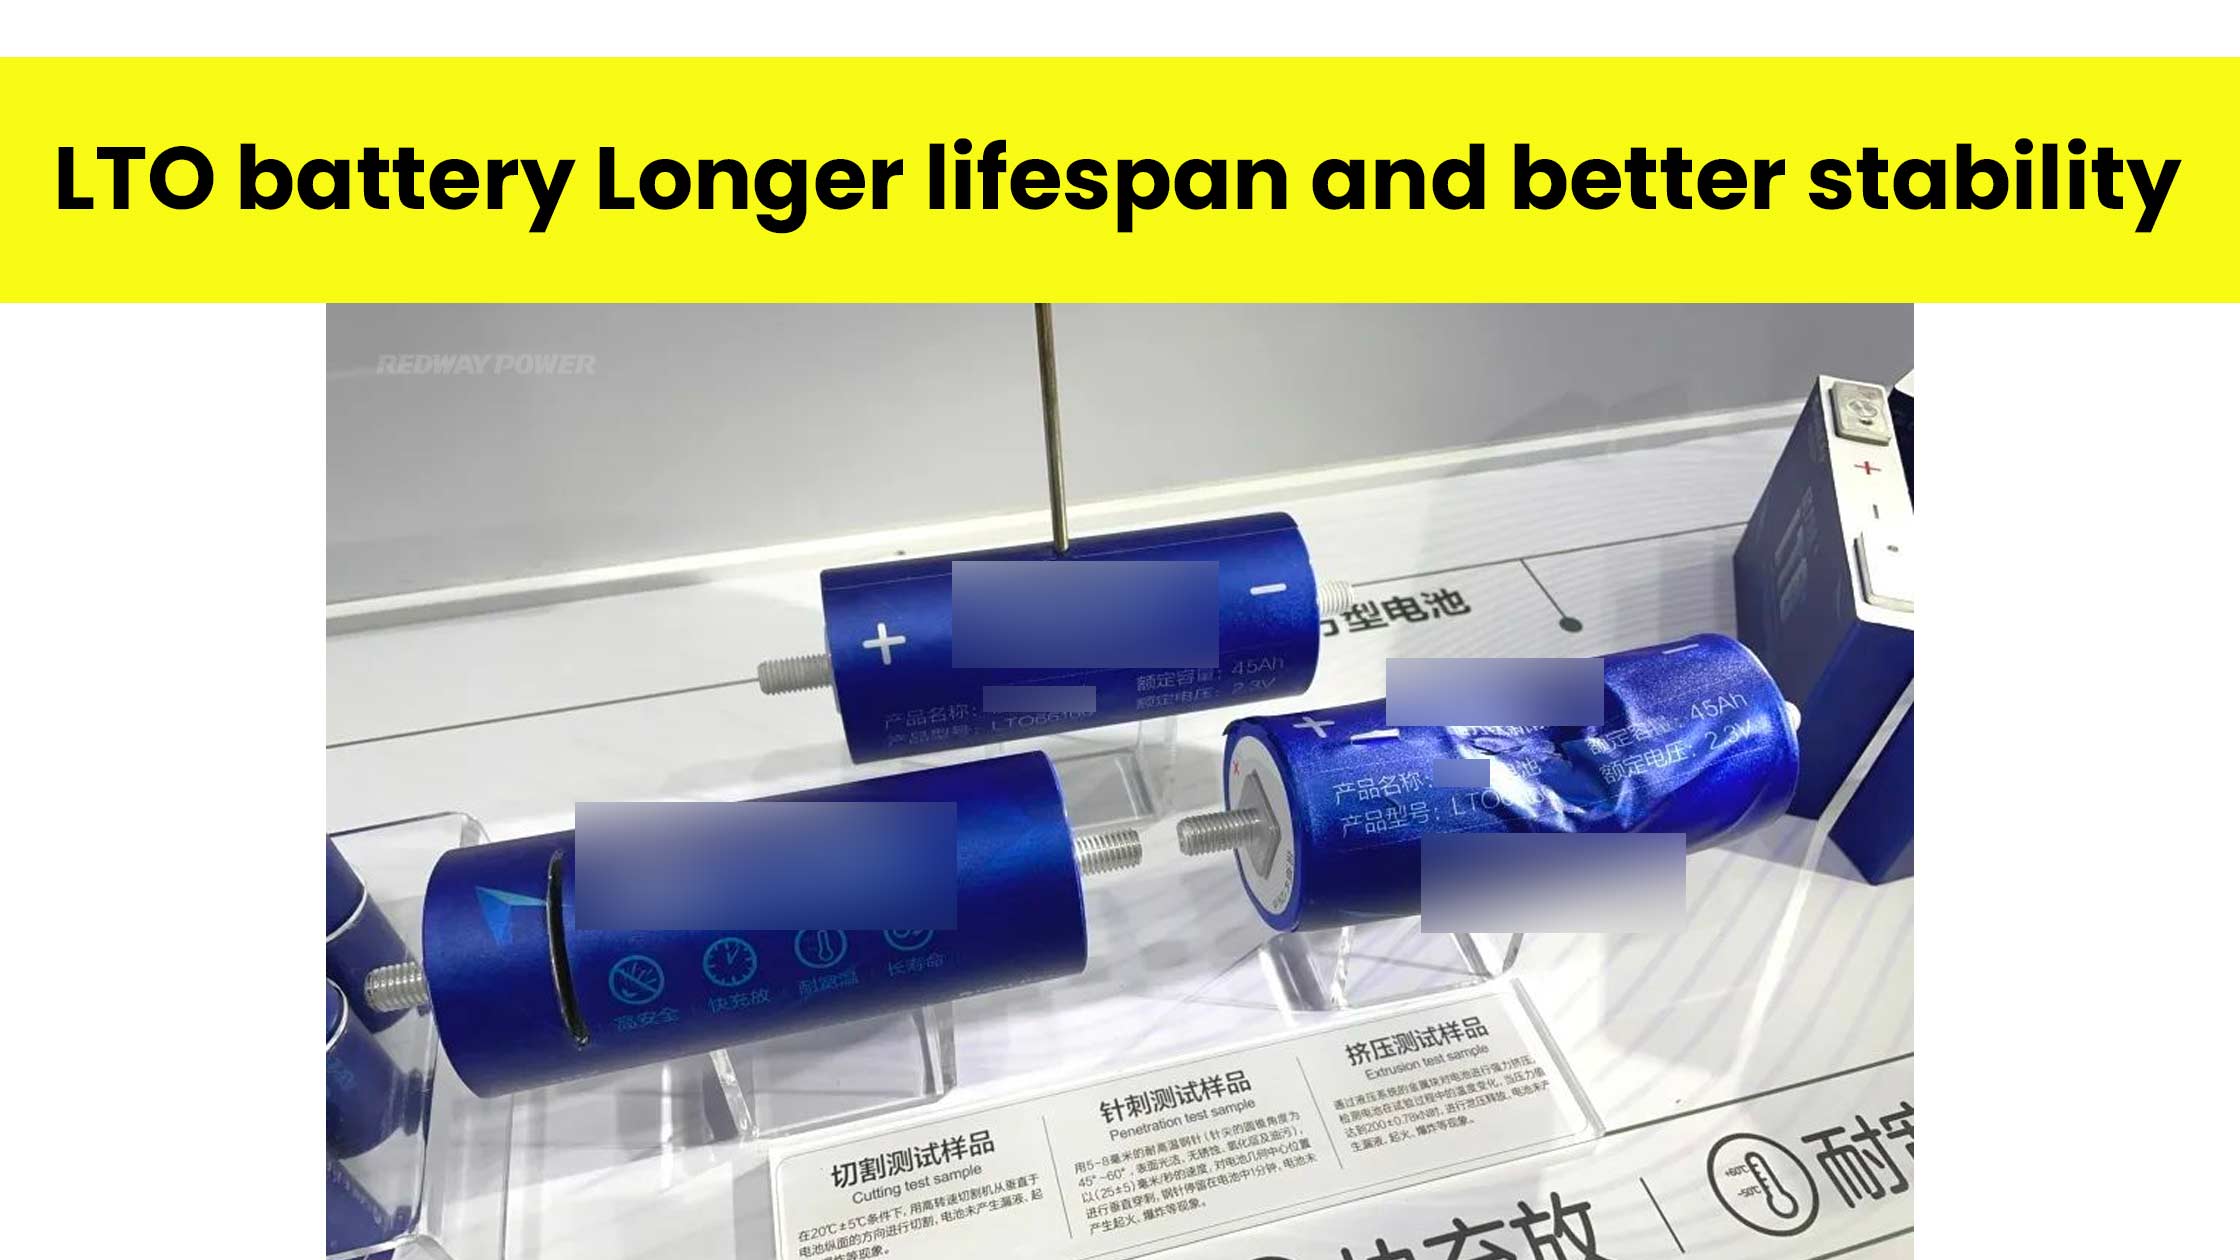 LTO battery Longer lifespan and better stability